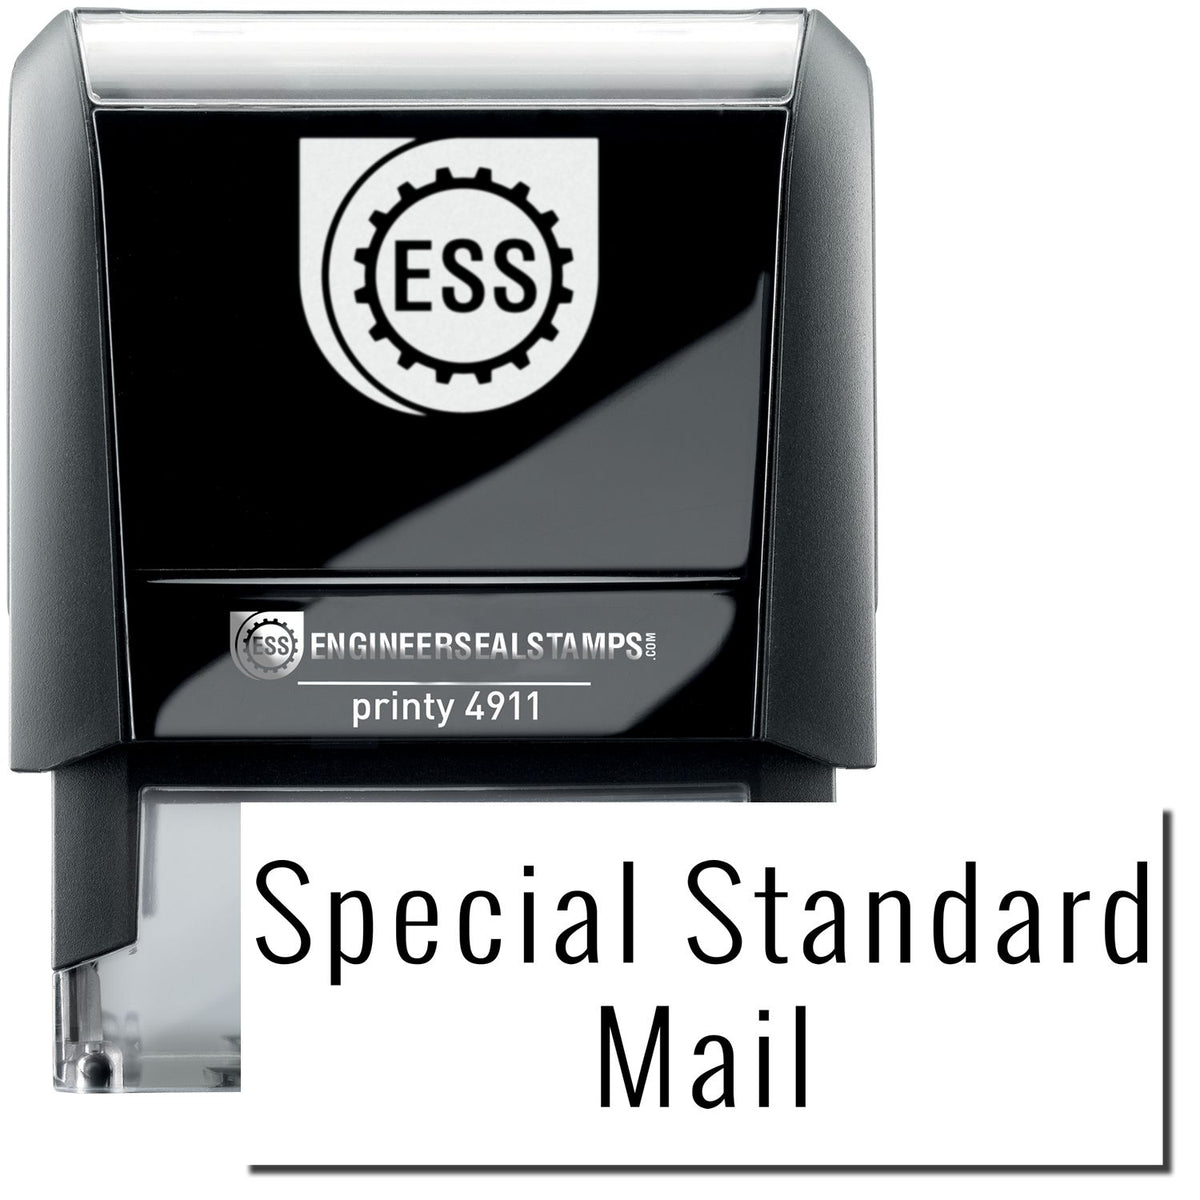 A self-inking stamp with a stamped image showing how the text &quot;Special Standard Mail&quot; is displayed after stamping.